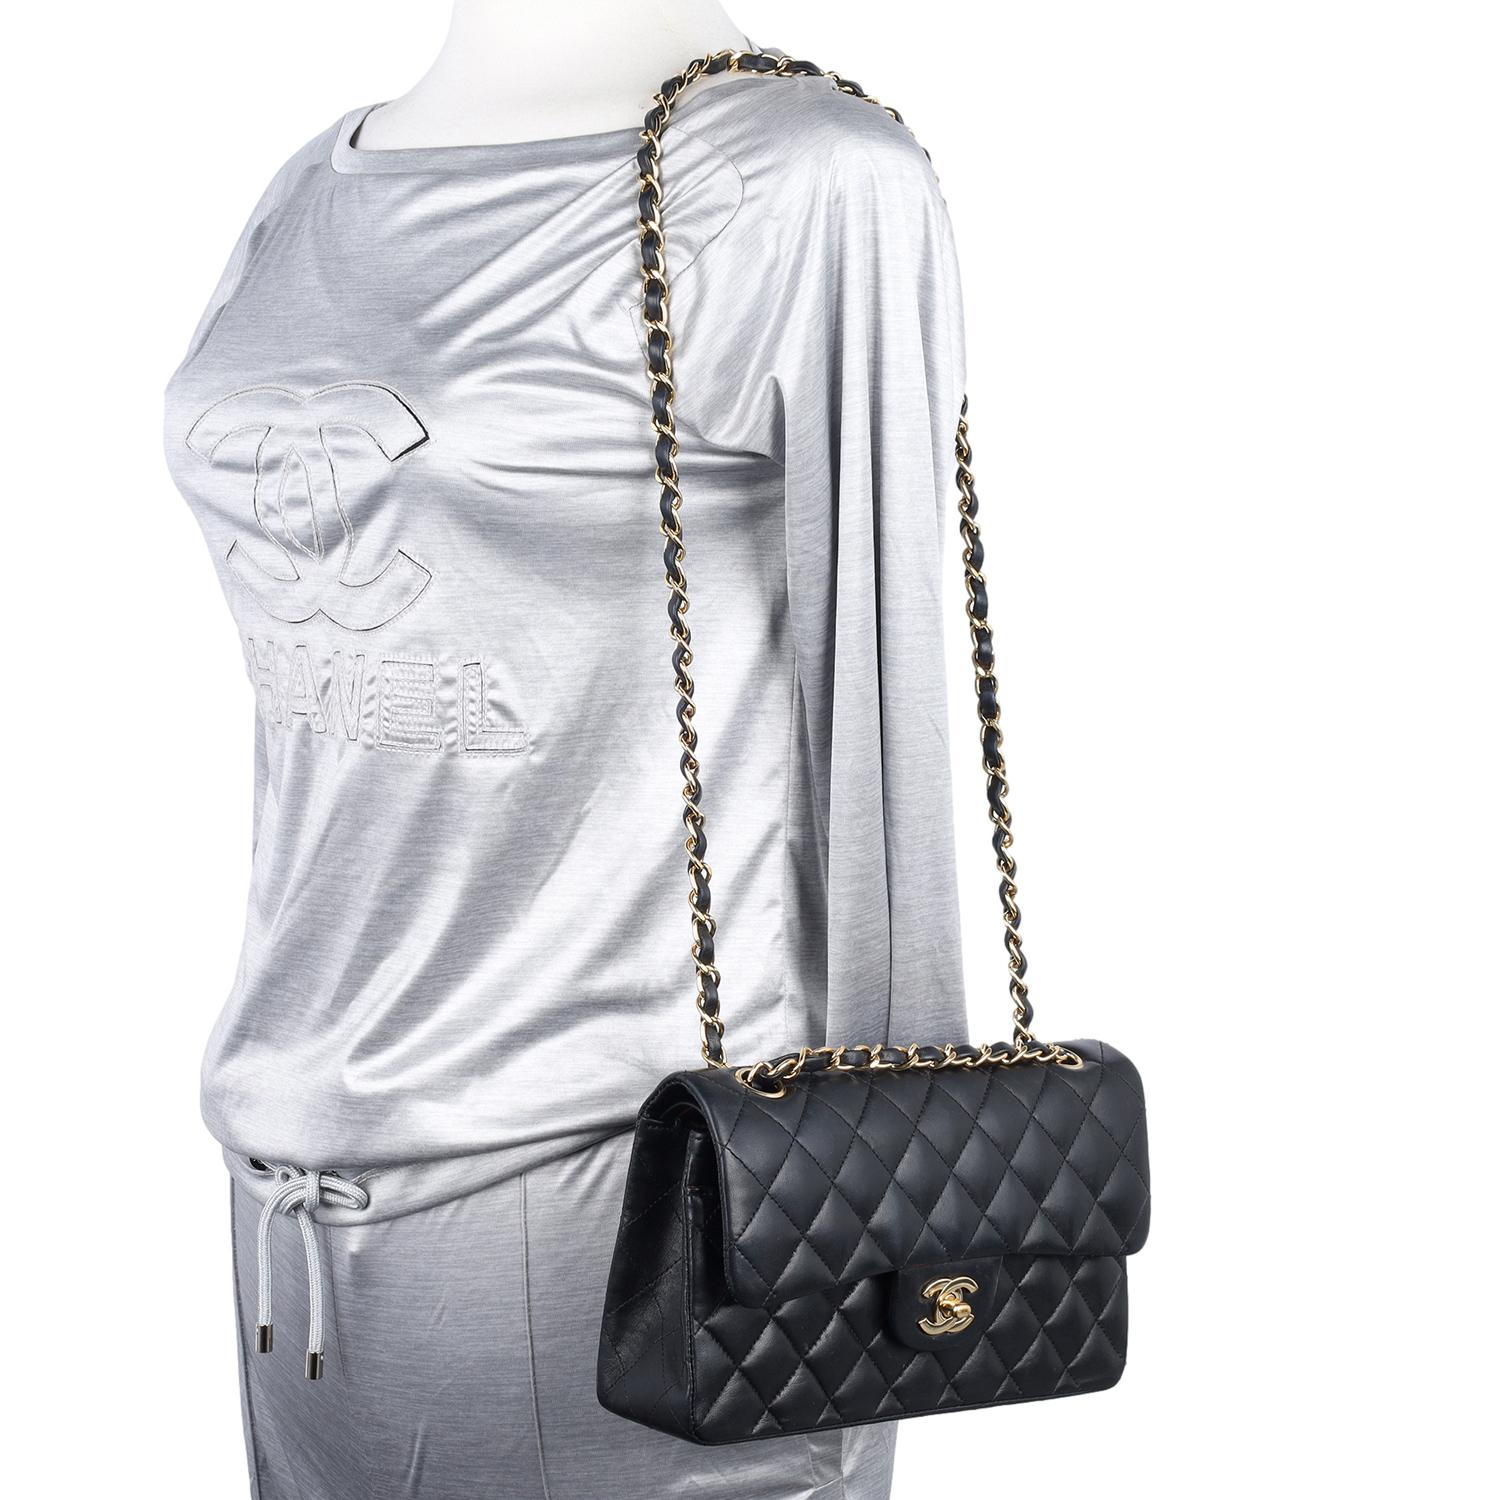 Authentic, pre-loved Chanel Classic double flap quilted lambskin leather shoulder bag in black. This classic shoulder bag is crafted of diamond quilted lambskin leather, features a rear pocket, gold chain-link shoulder strap threaded with leather